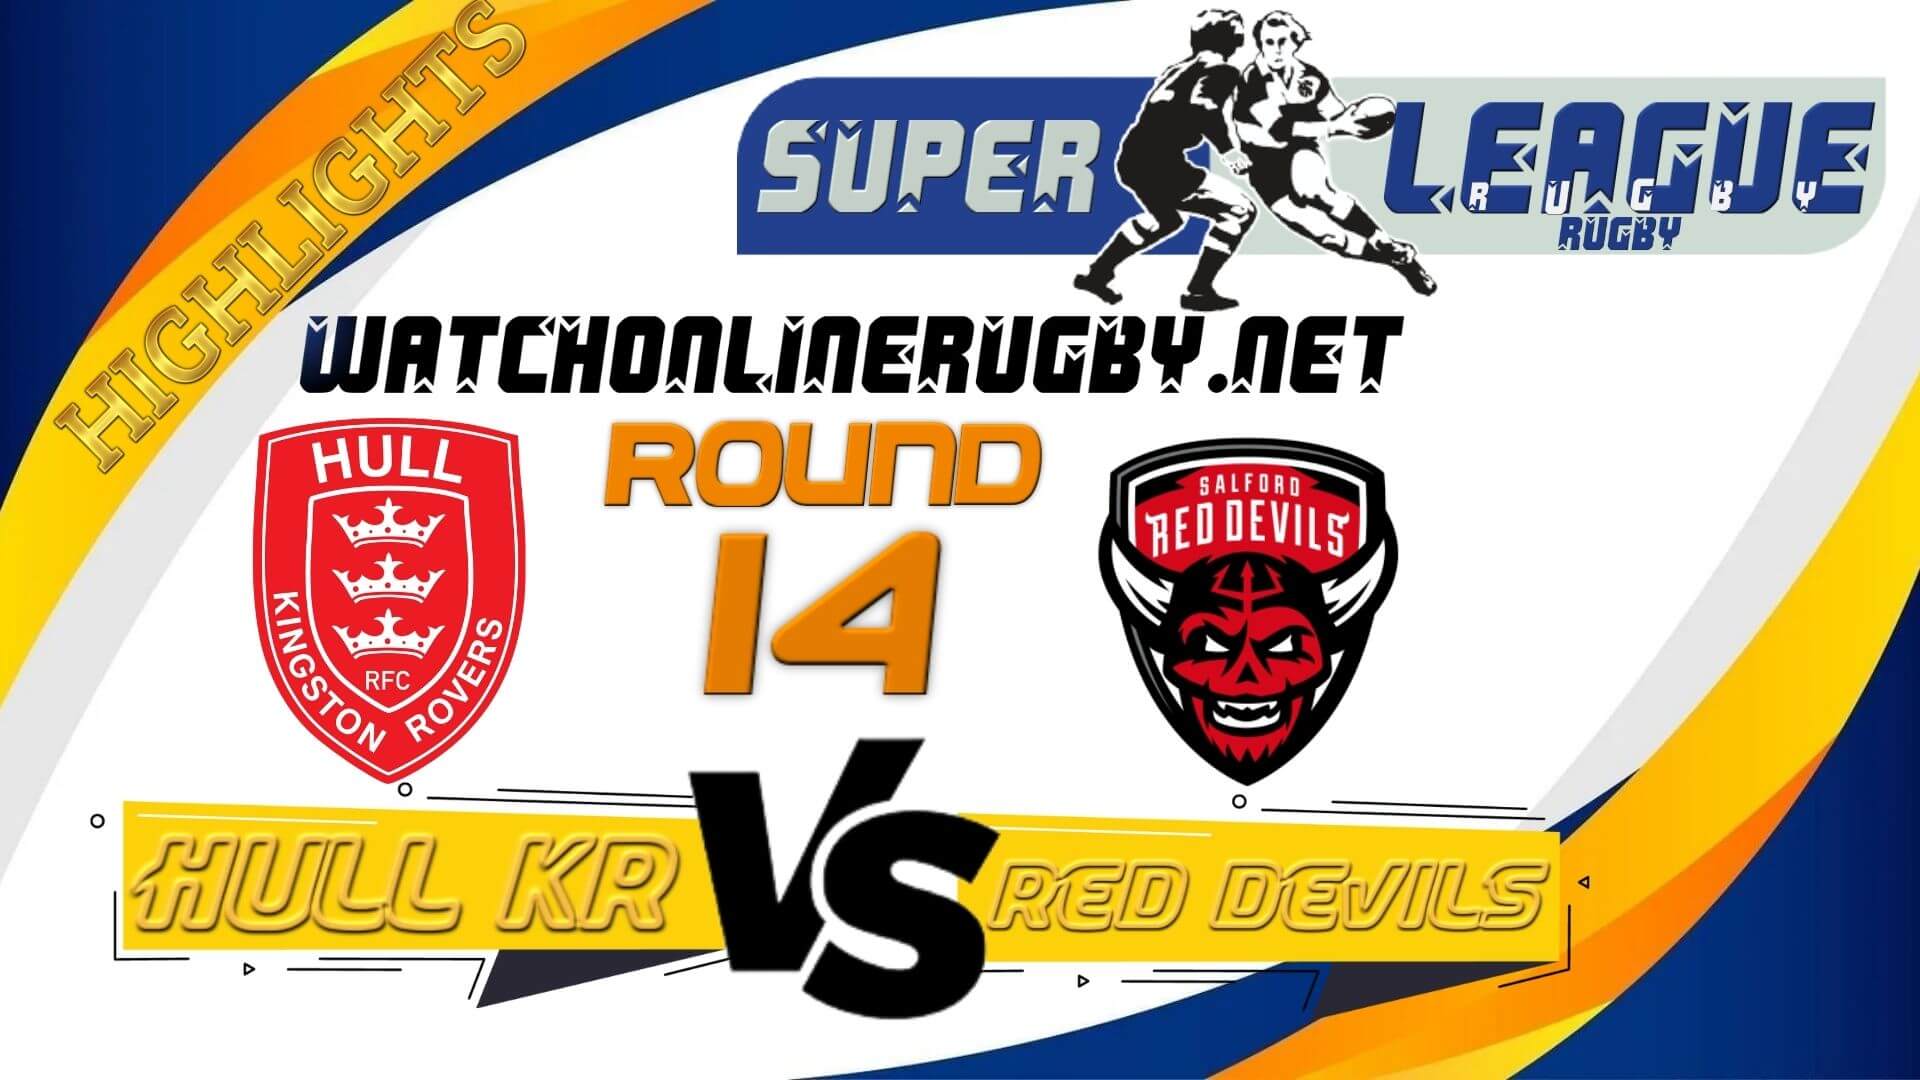 Hull KR Vs Salford Red Devils Super League Rugby 2022 RD 14